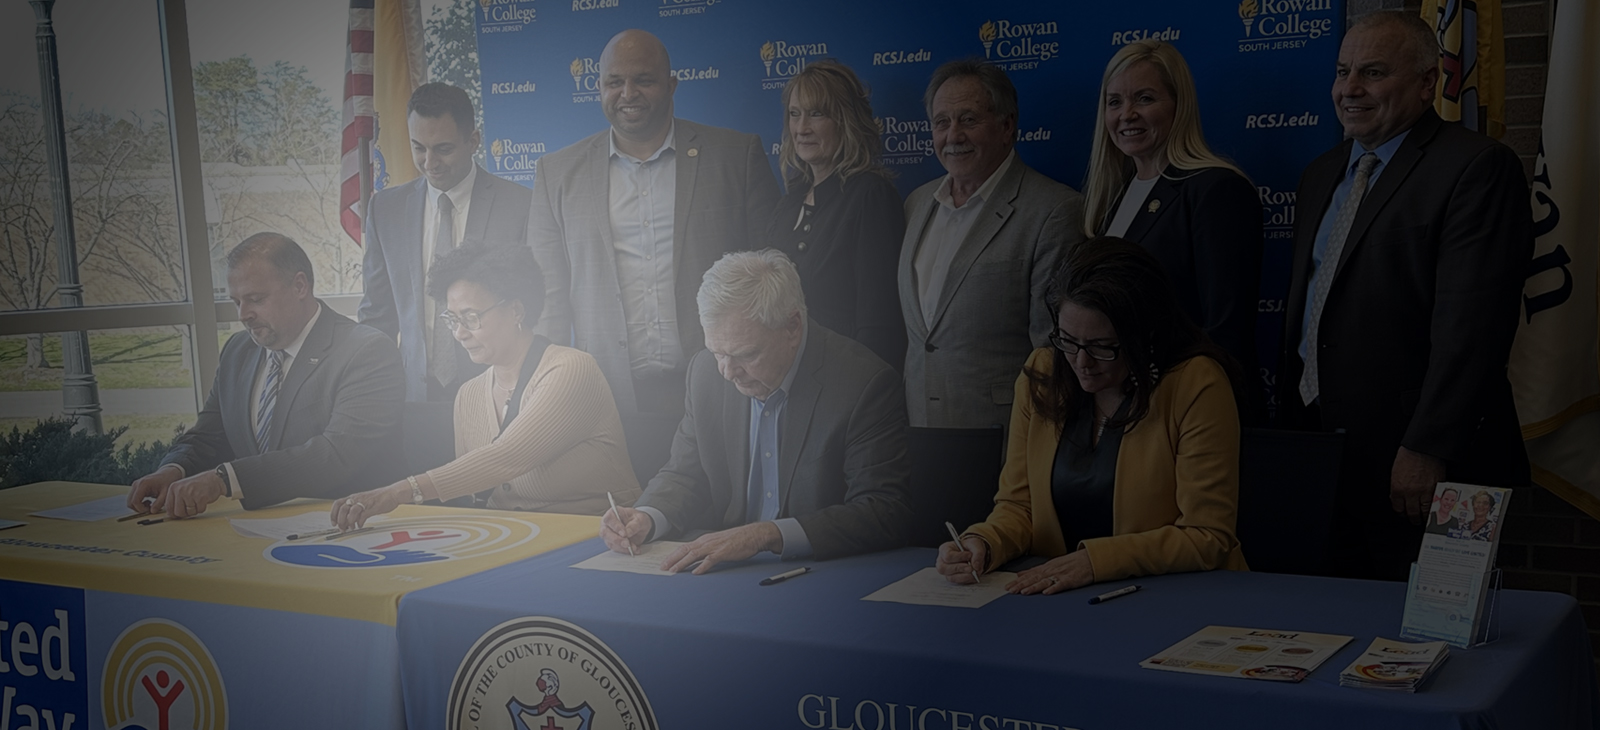 Lead Gloucester County Signing at RCSJ